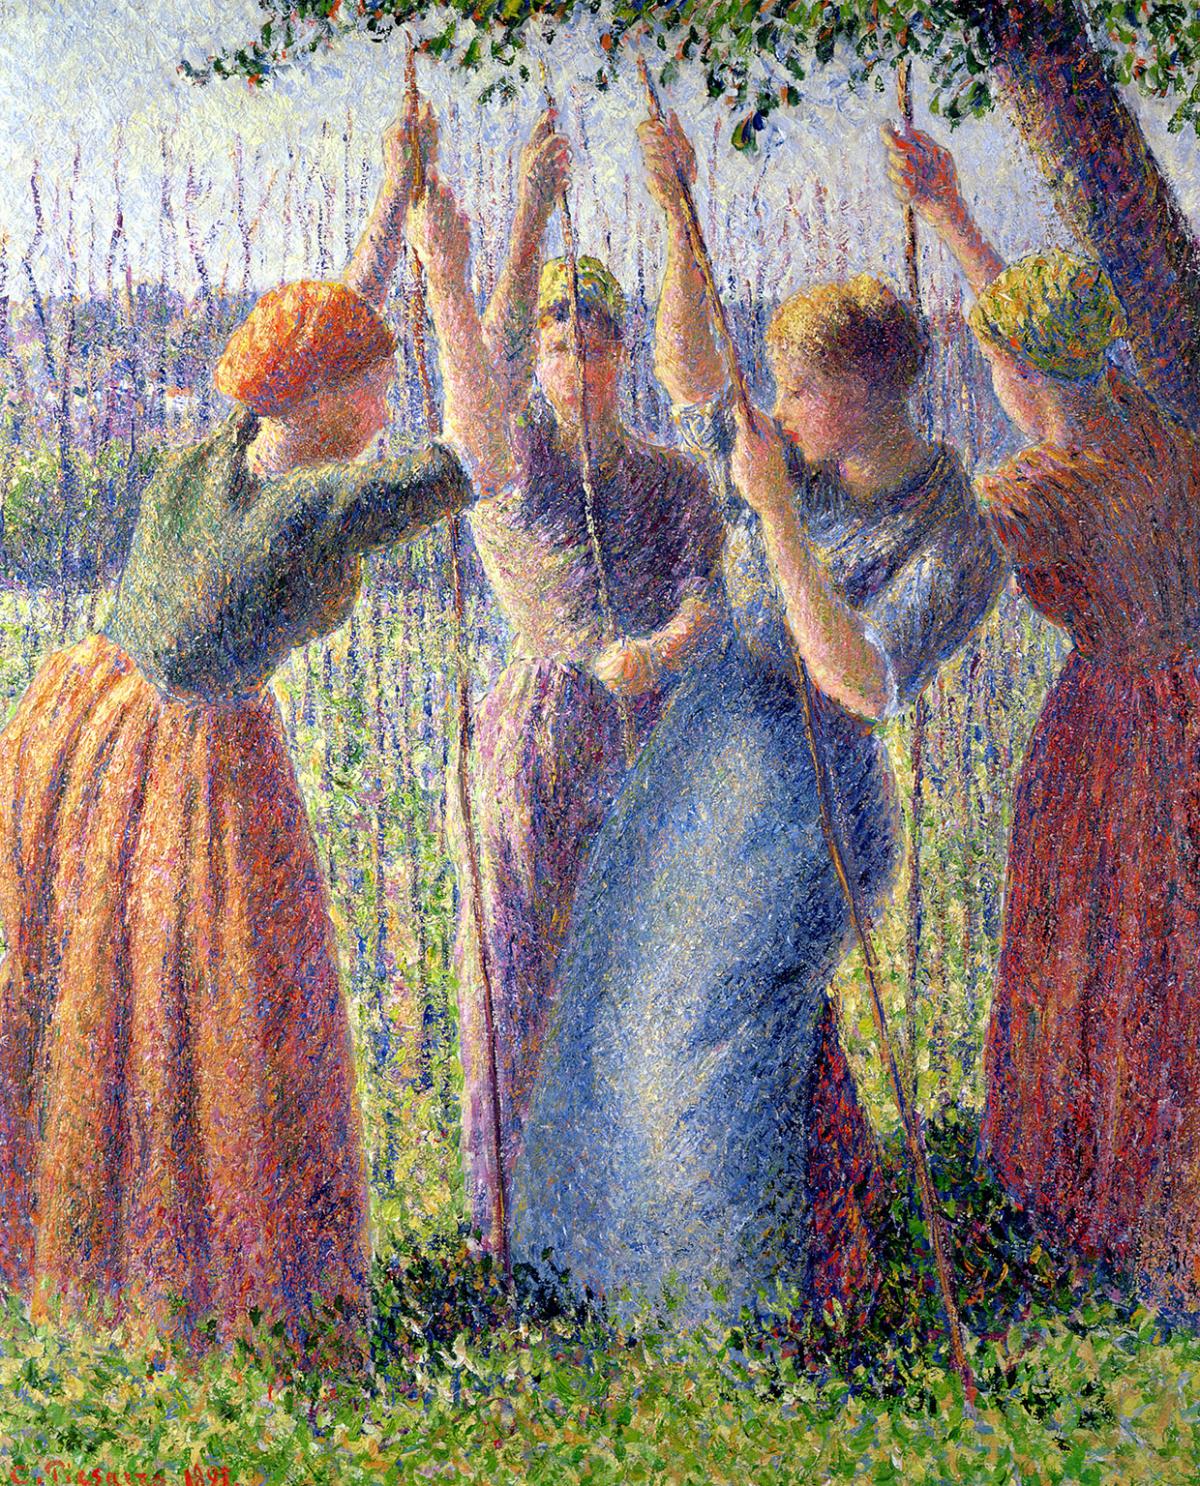 Camille Pissarro, "Peasant Women Planting Poles in the Ground," 1891